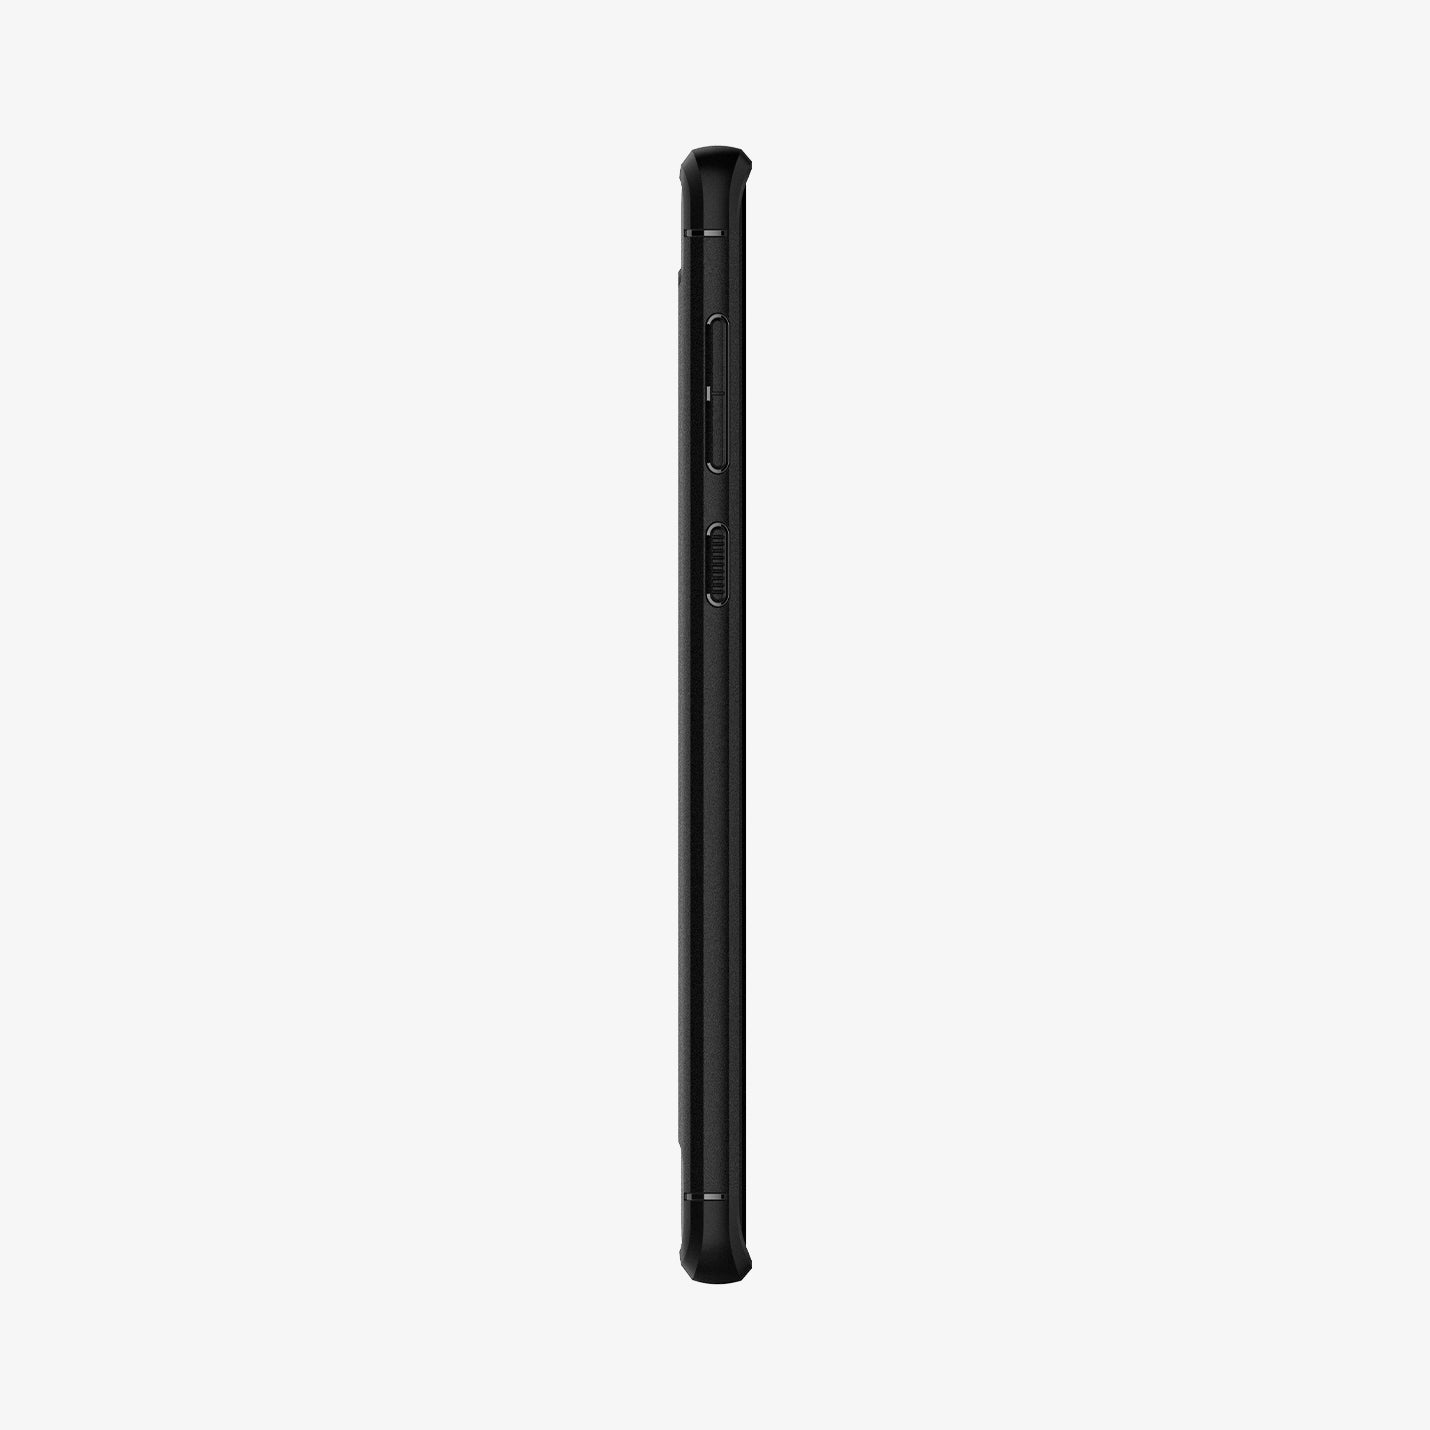 599CS24572 - Galaxy Note 9 Case Rugged Armor in matte black showing the side with volume controls